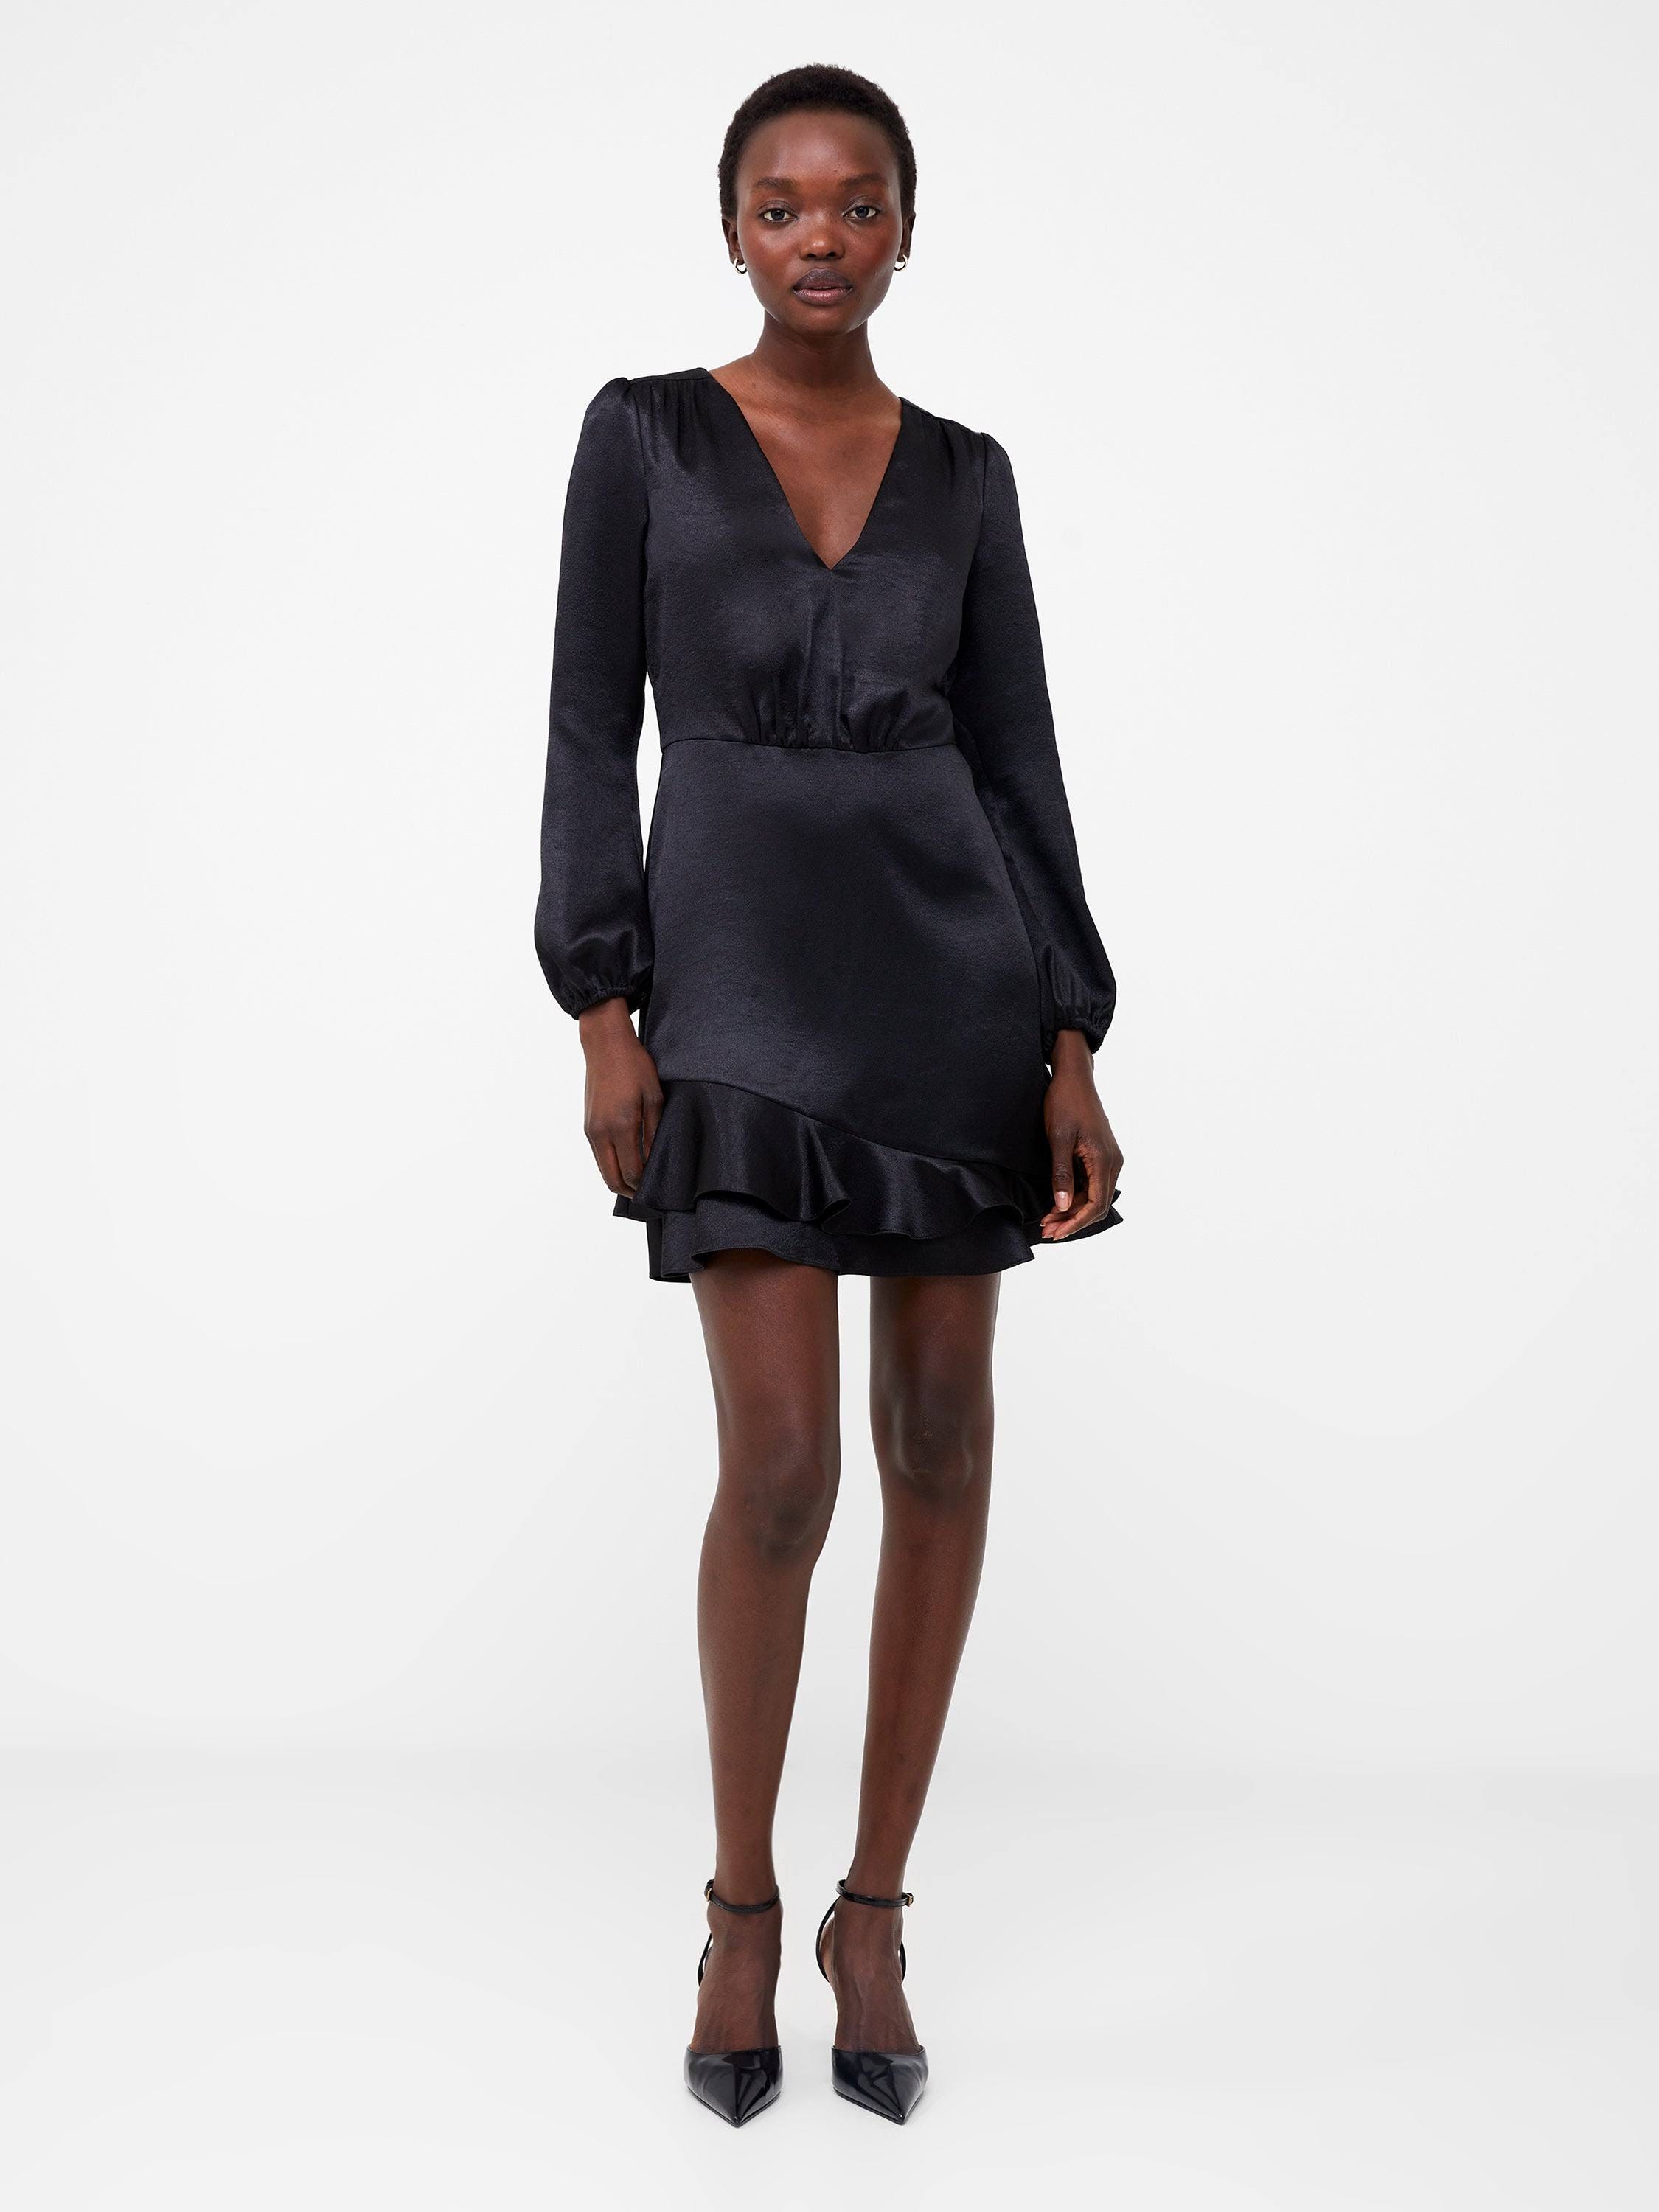 Elegant Black Satin Ruffle Mini Dress by Denney for French Connection | Image